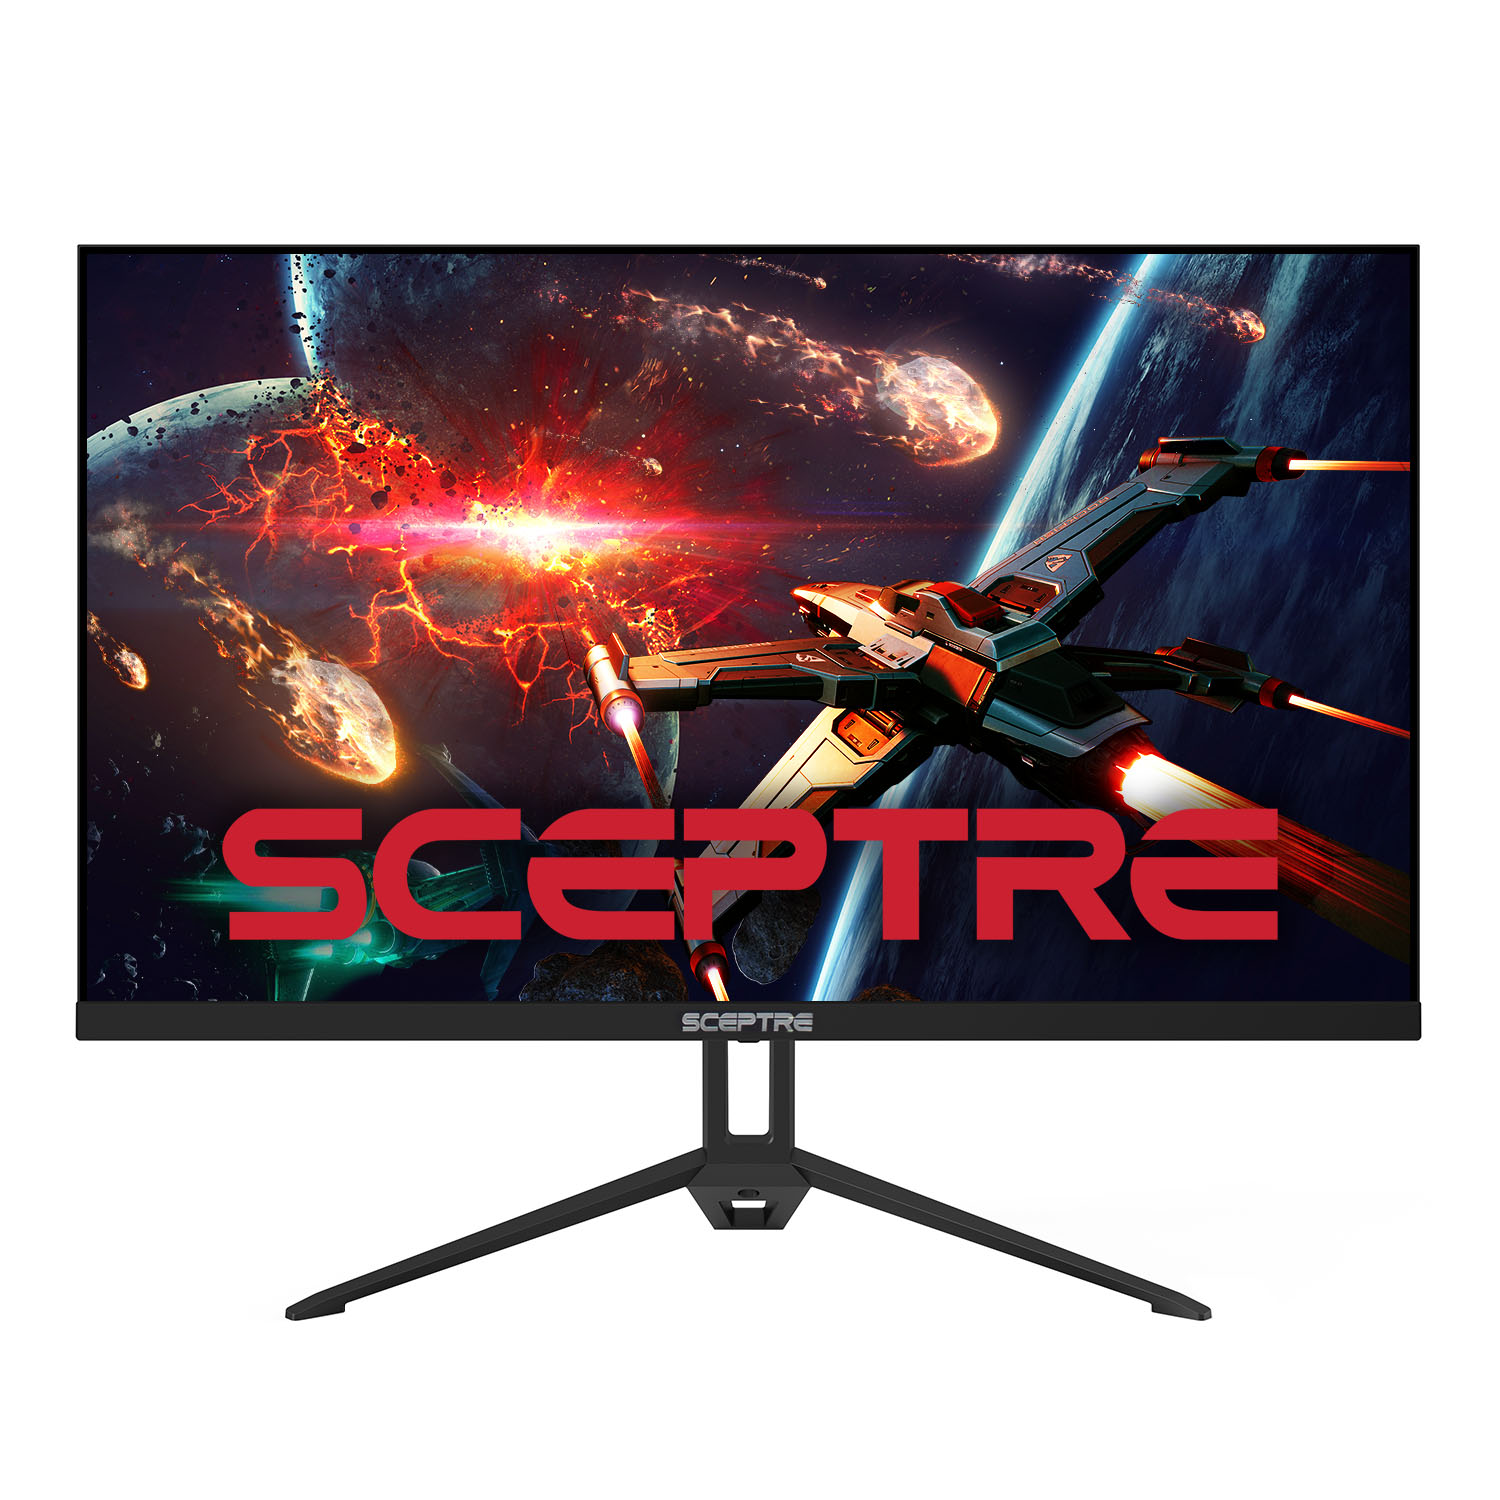 24" Gaming Monitor 1080p up to 165Hz 91% sRGB AMD FreeSync, Build-in Speakers Machine Black 2022 (E248B-FWS168) - image 1 of 6